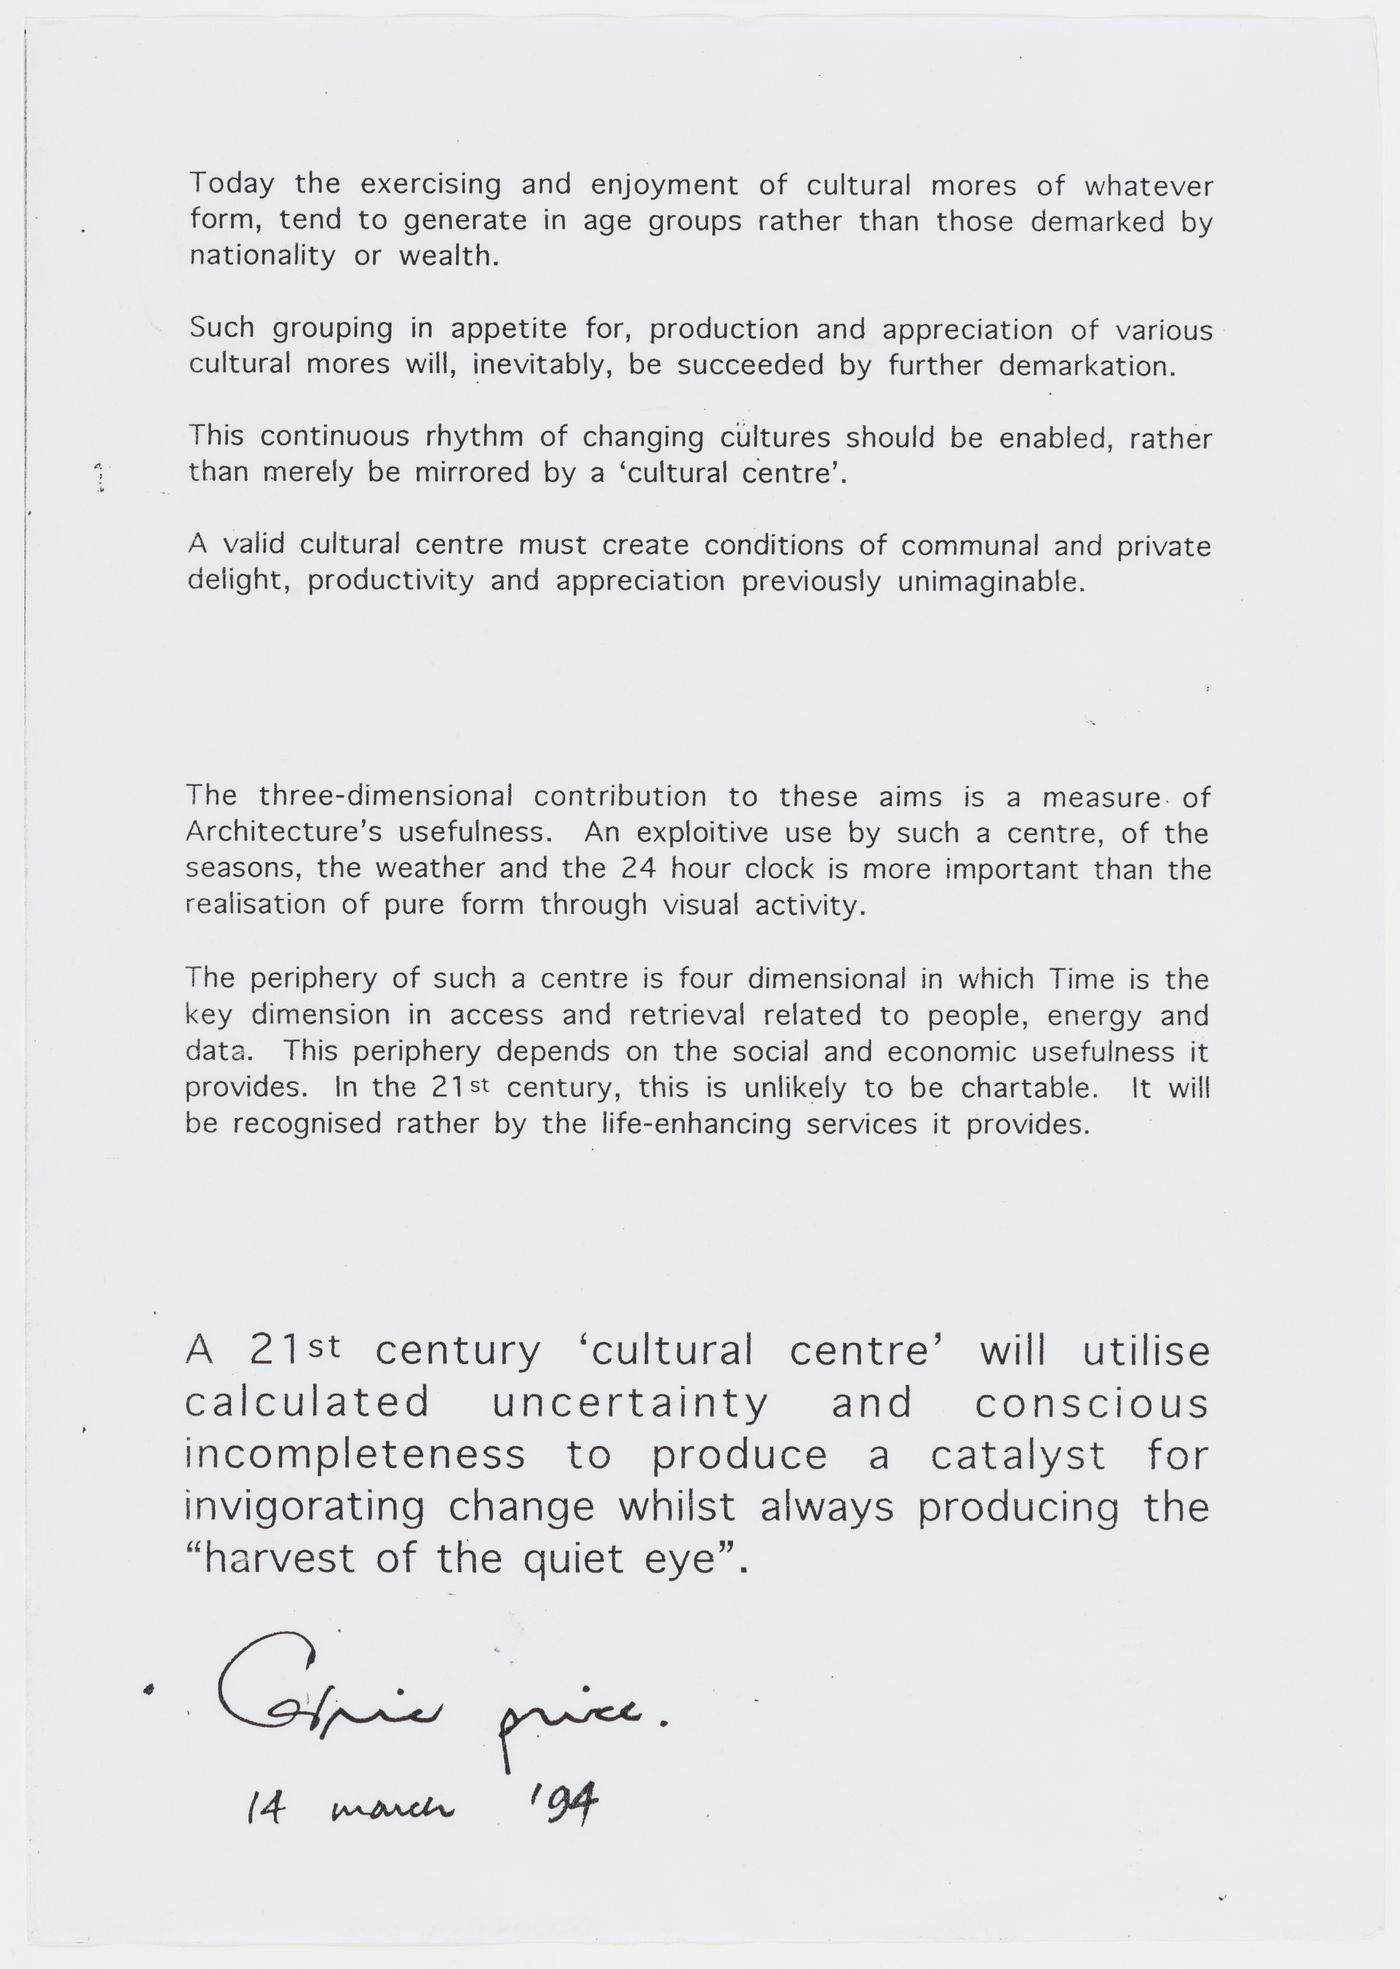 Text entitled "Statement on the role of cultural centres in the 21st Century" (second of two sheets) - from the project file "IFPRI"